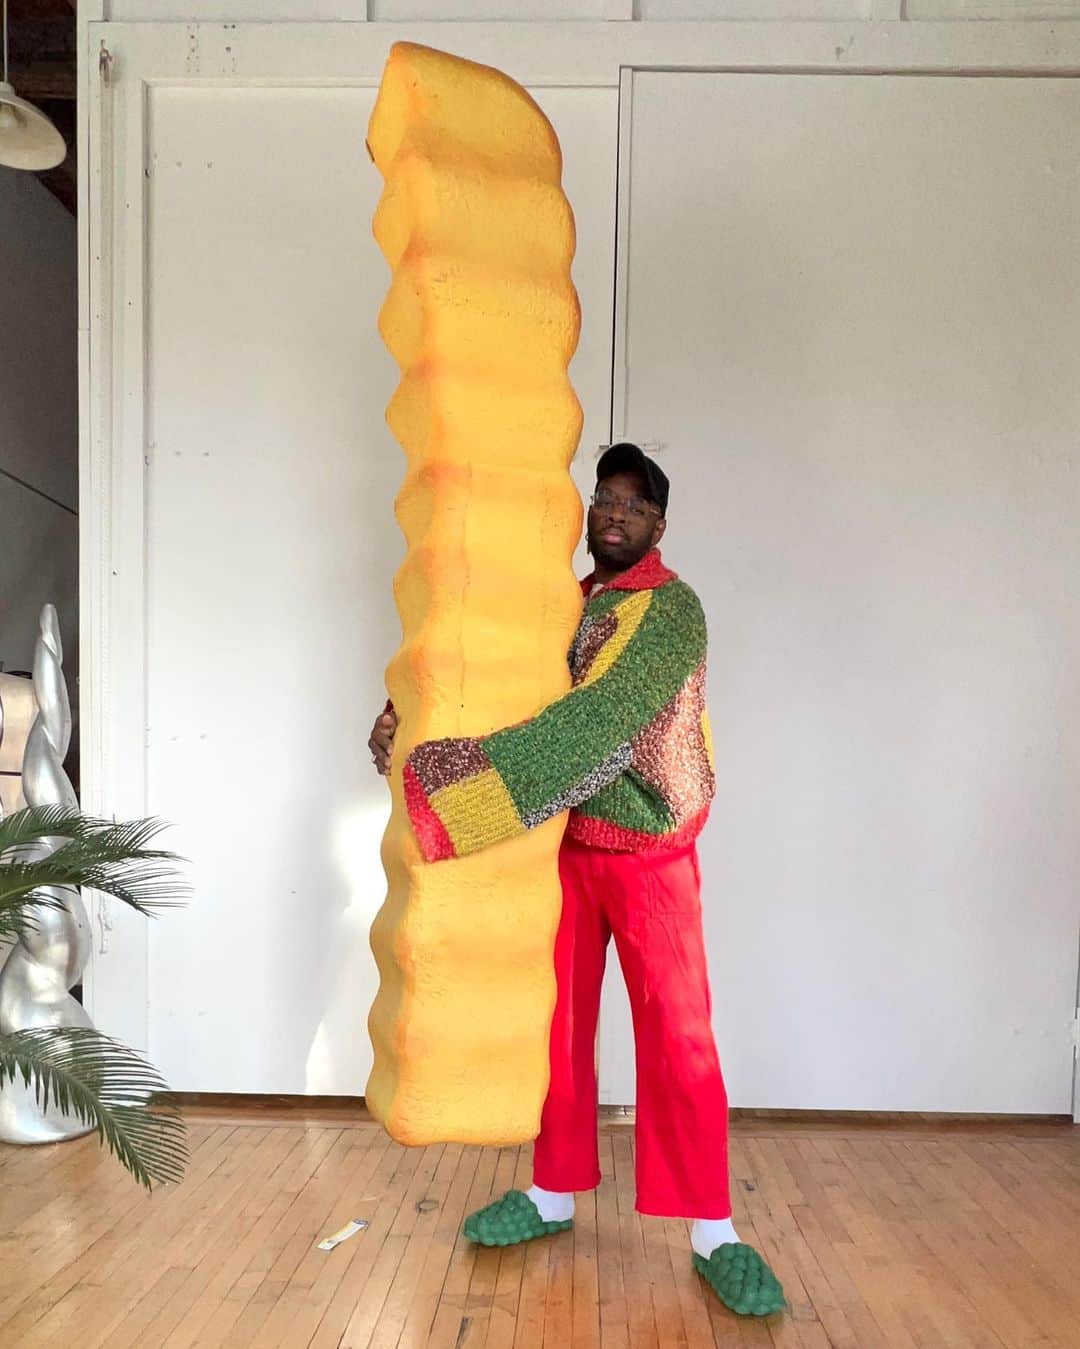 Paul Octaviousのインスタグラム：「Dear @burgerking,  In 2013 you hired me to be a part of your “Satisfries” aka diet French fries Campaign. You had me find a giant fiber glass French fry  in Chicago and take photos with it. I kept the fry in storage for 9 years… now it sits in my studio and I can marvel at its greatness and reminded  of the time the American wasnt ready for your Diet Fry.  I’m ready for round two of working together.  -paul」